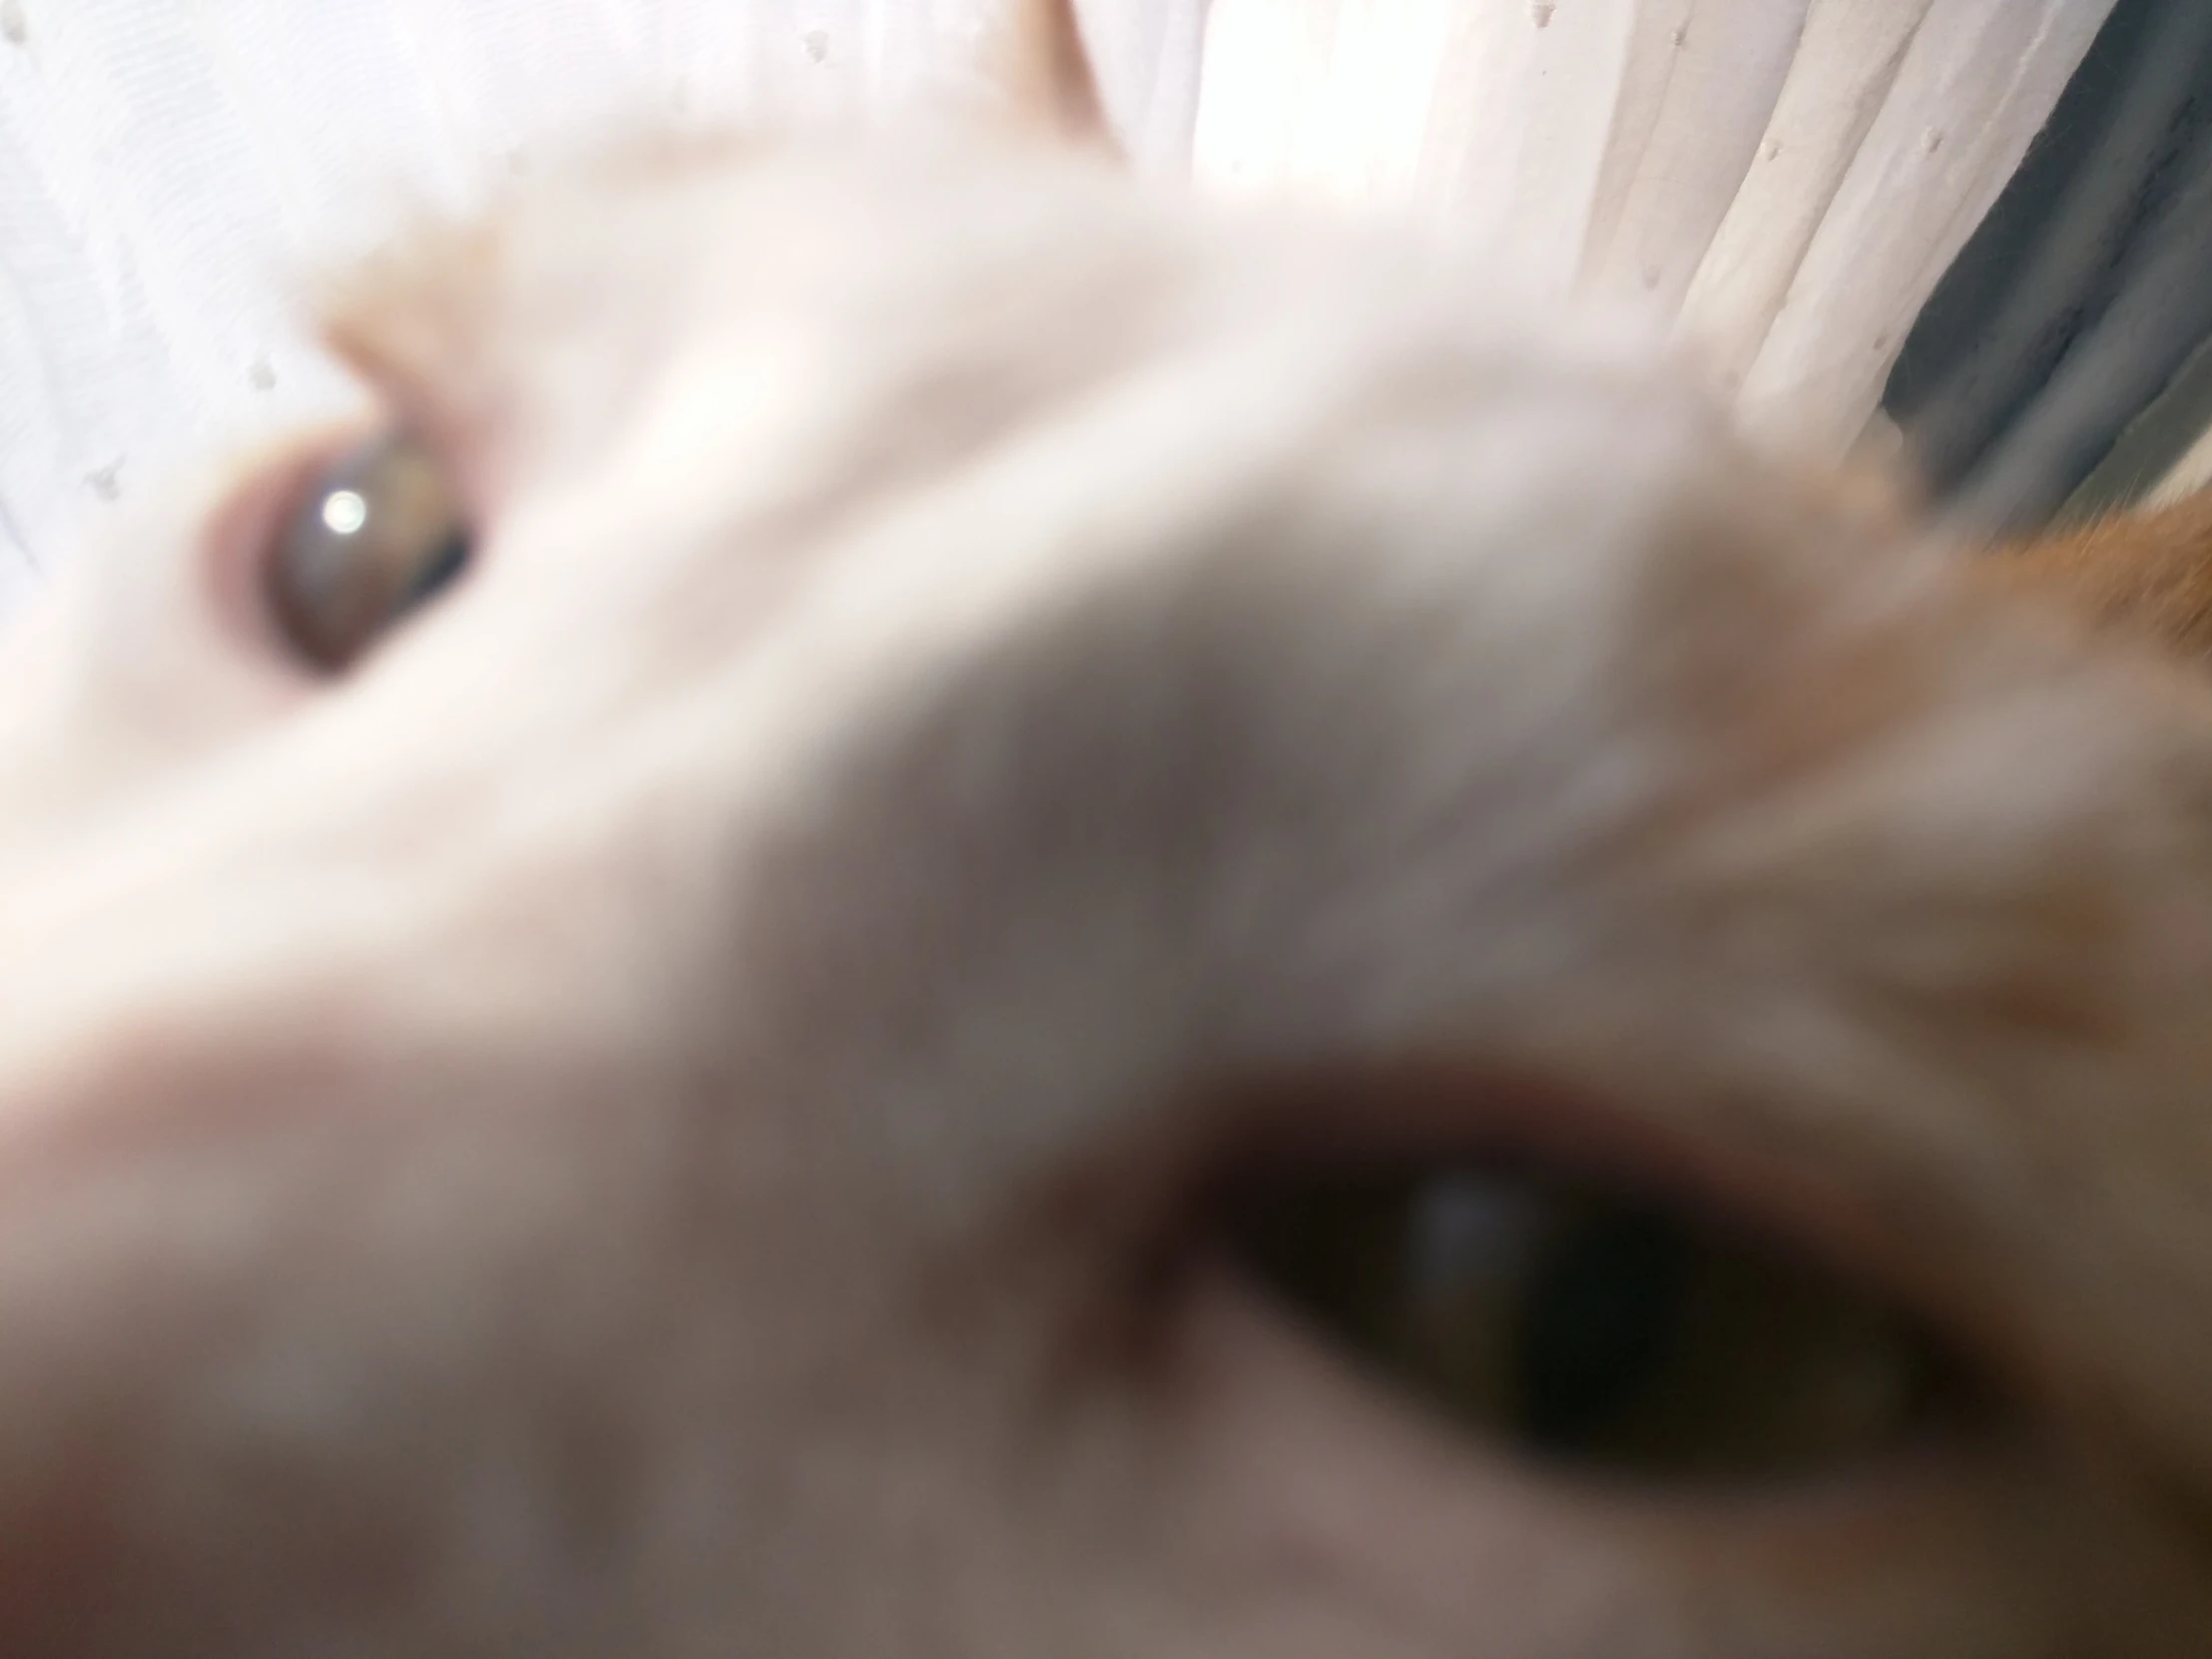 an orange and white cat looks up at the camera